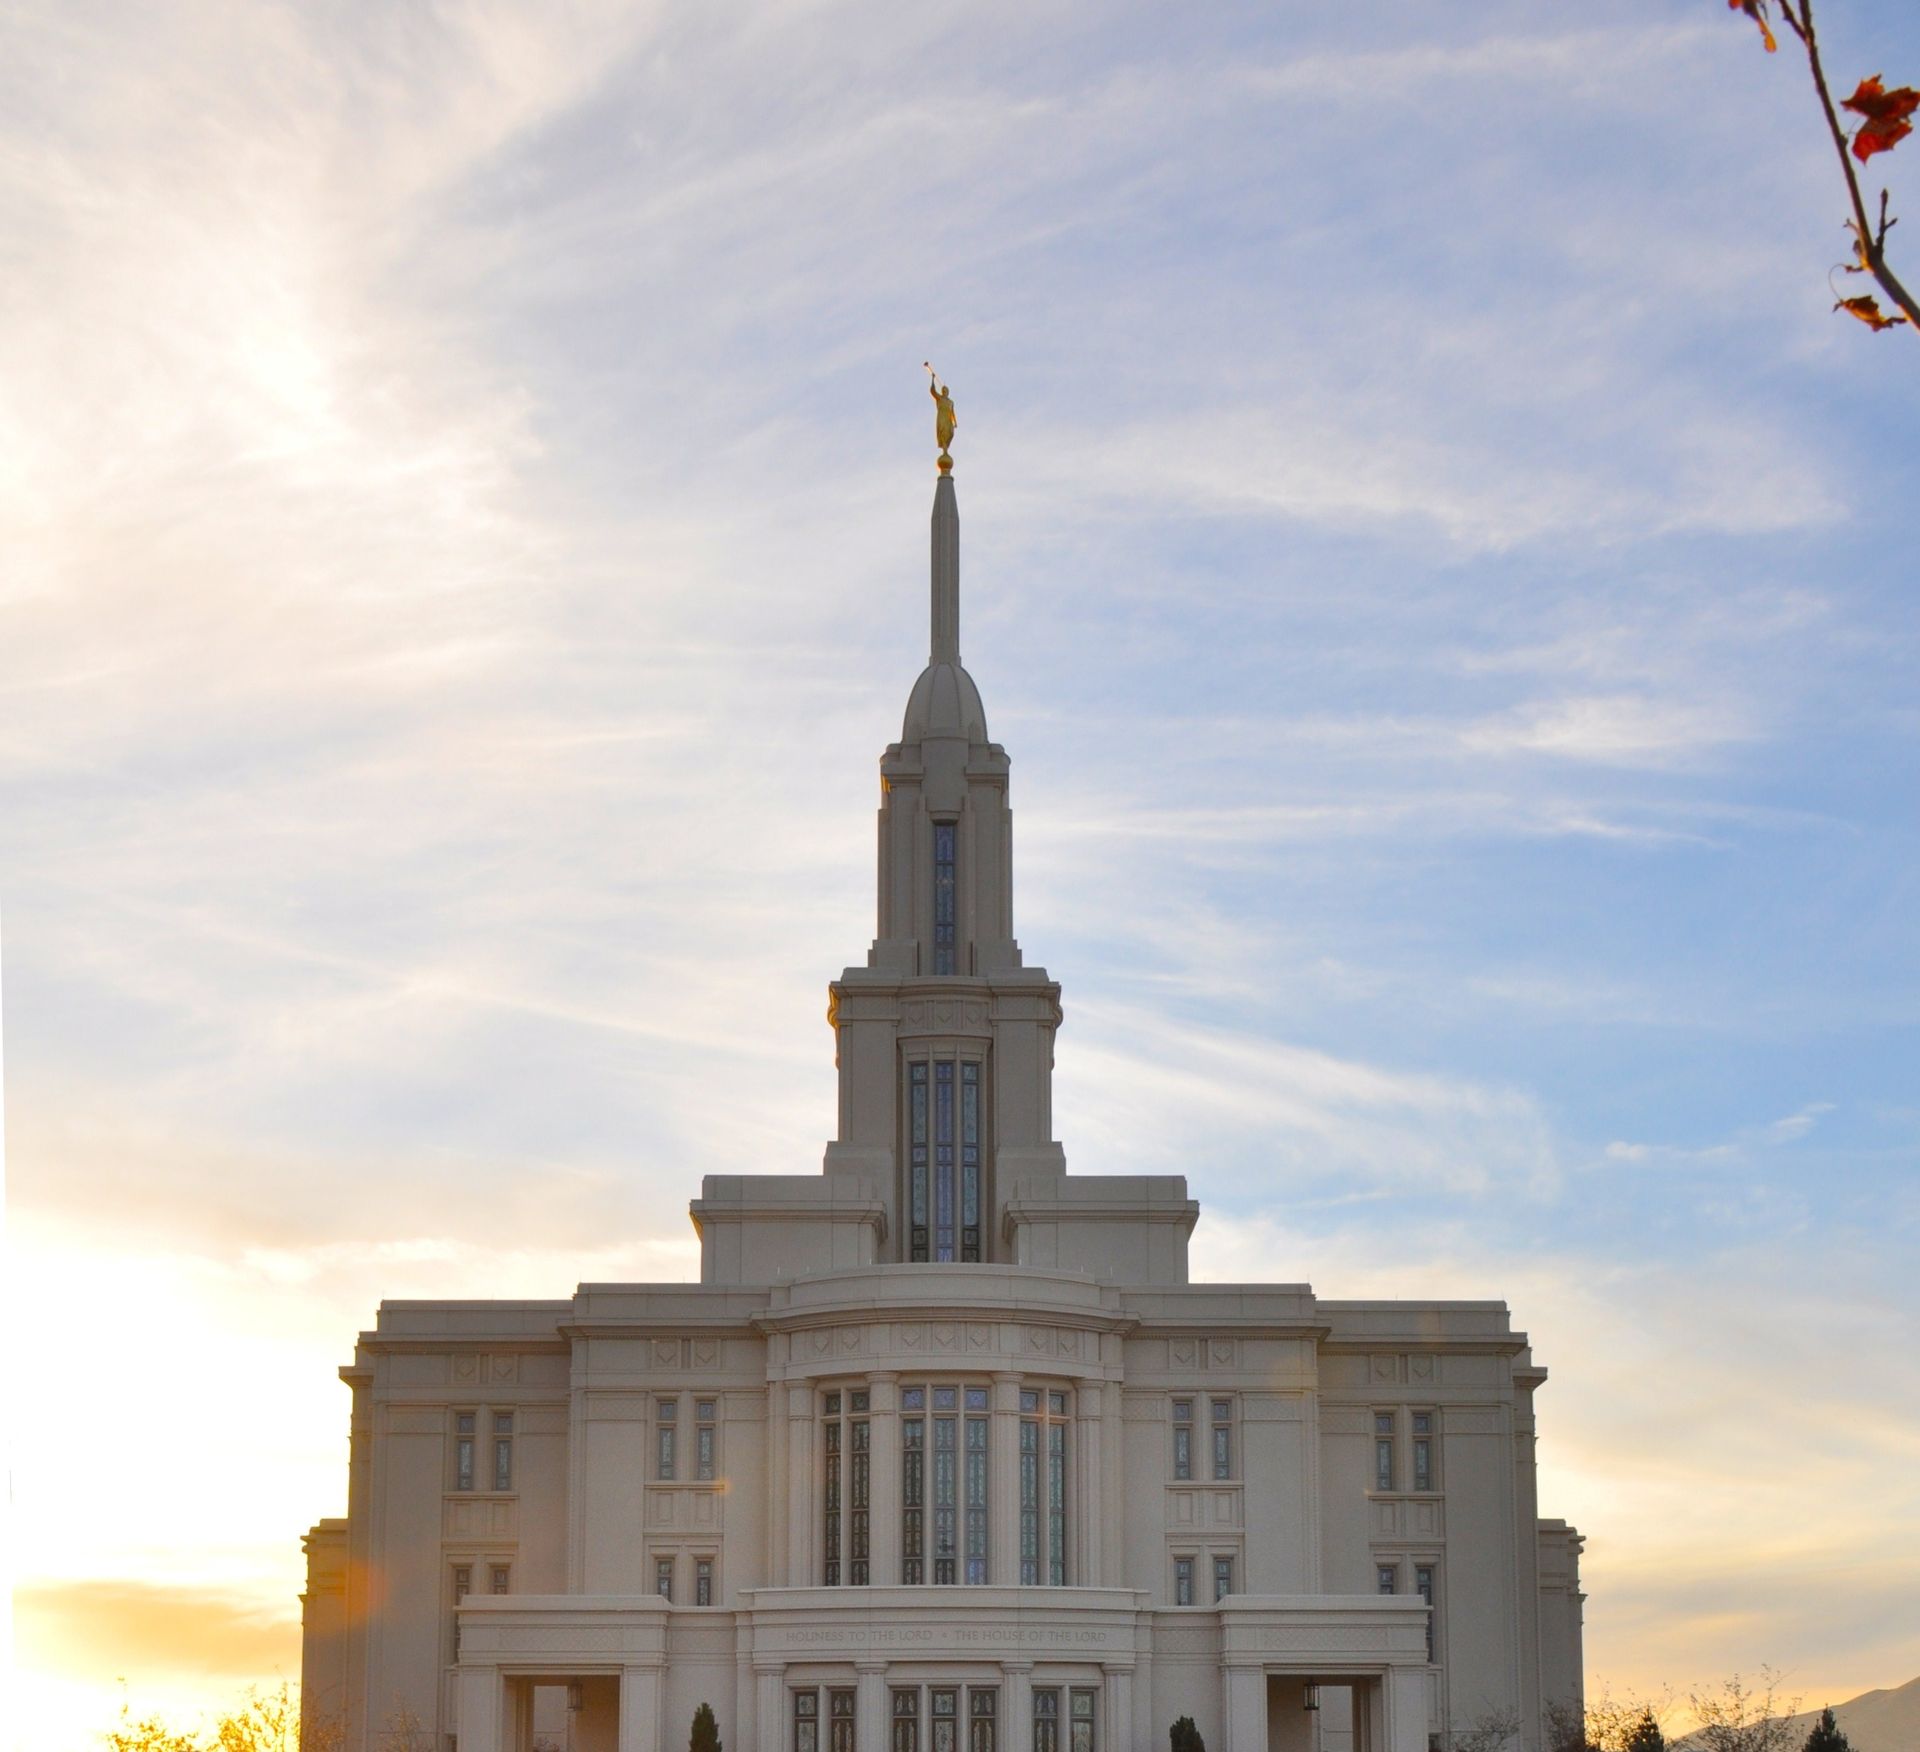 The east side of the Payson Utah Temple during sunset.